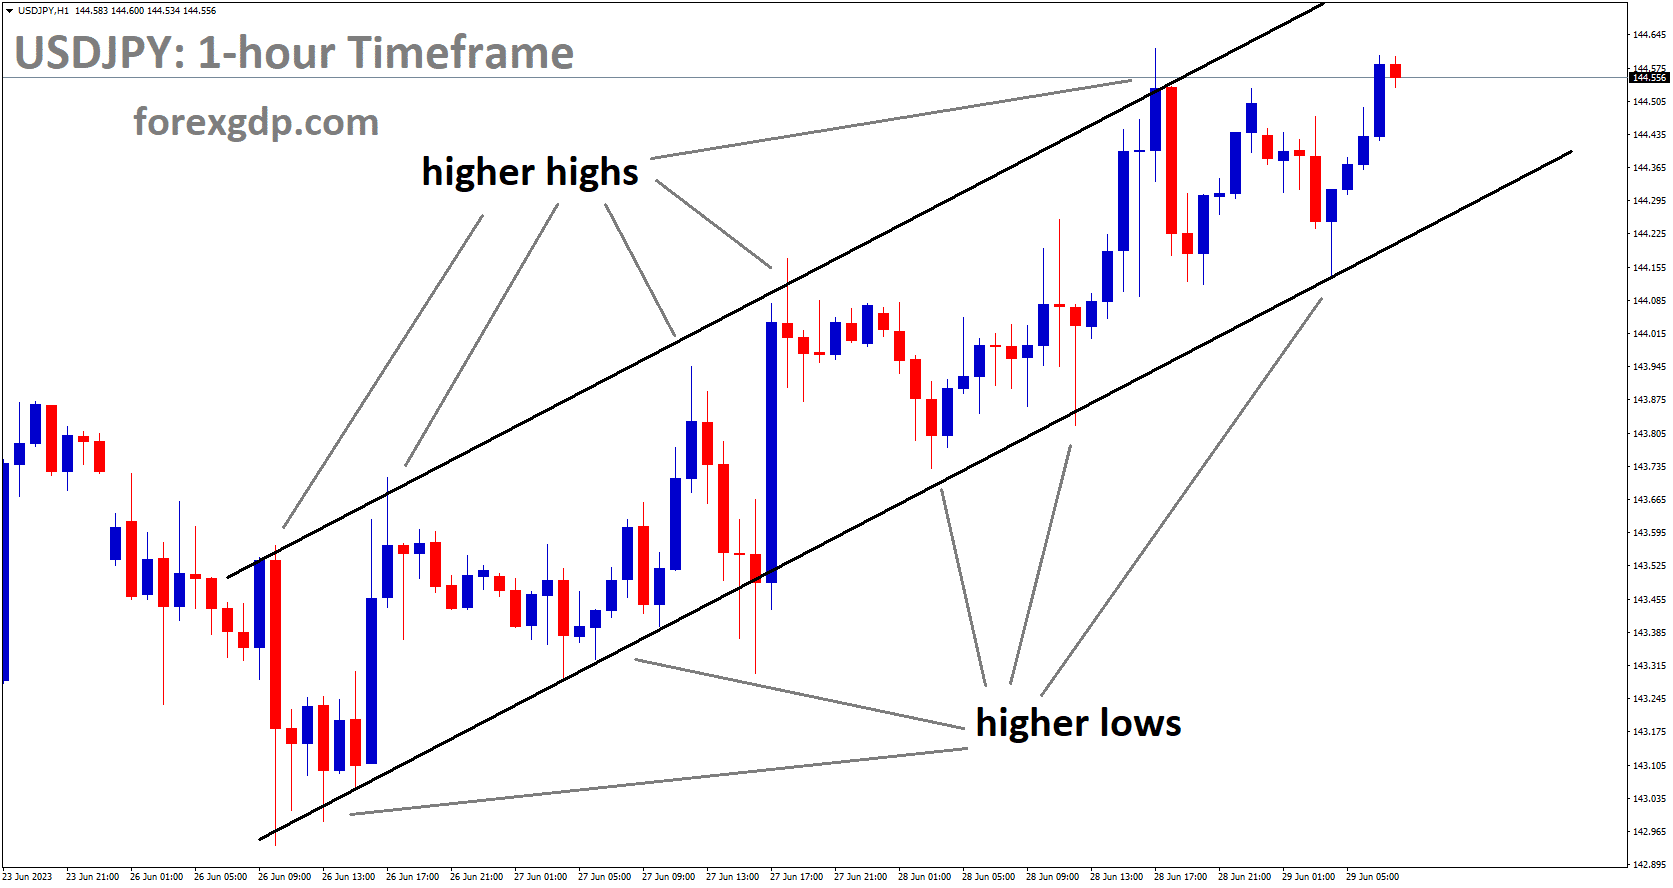 USDJPY is moving in a ascending channel and the market has rebounded from the higher higher low of the pattern.